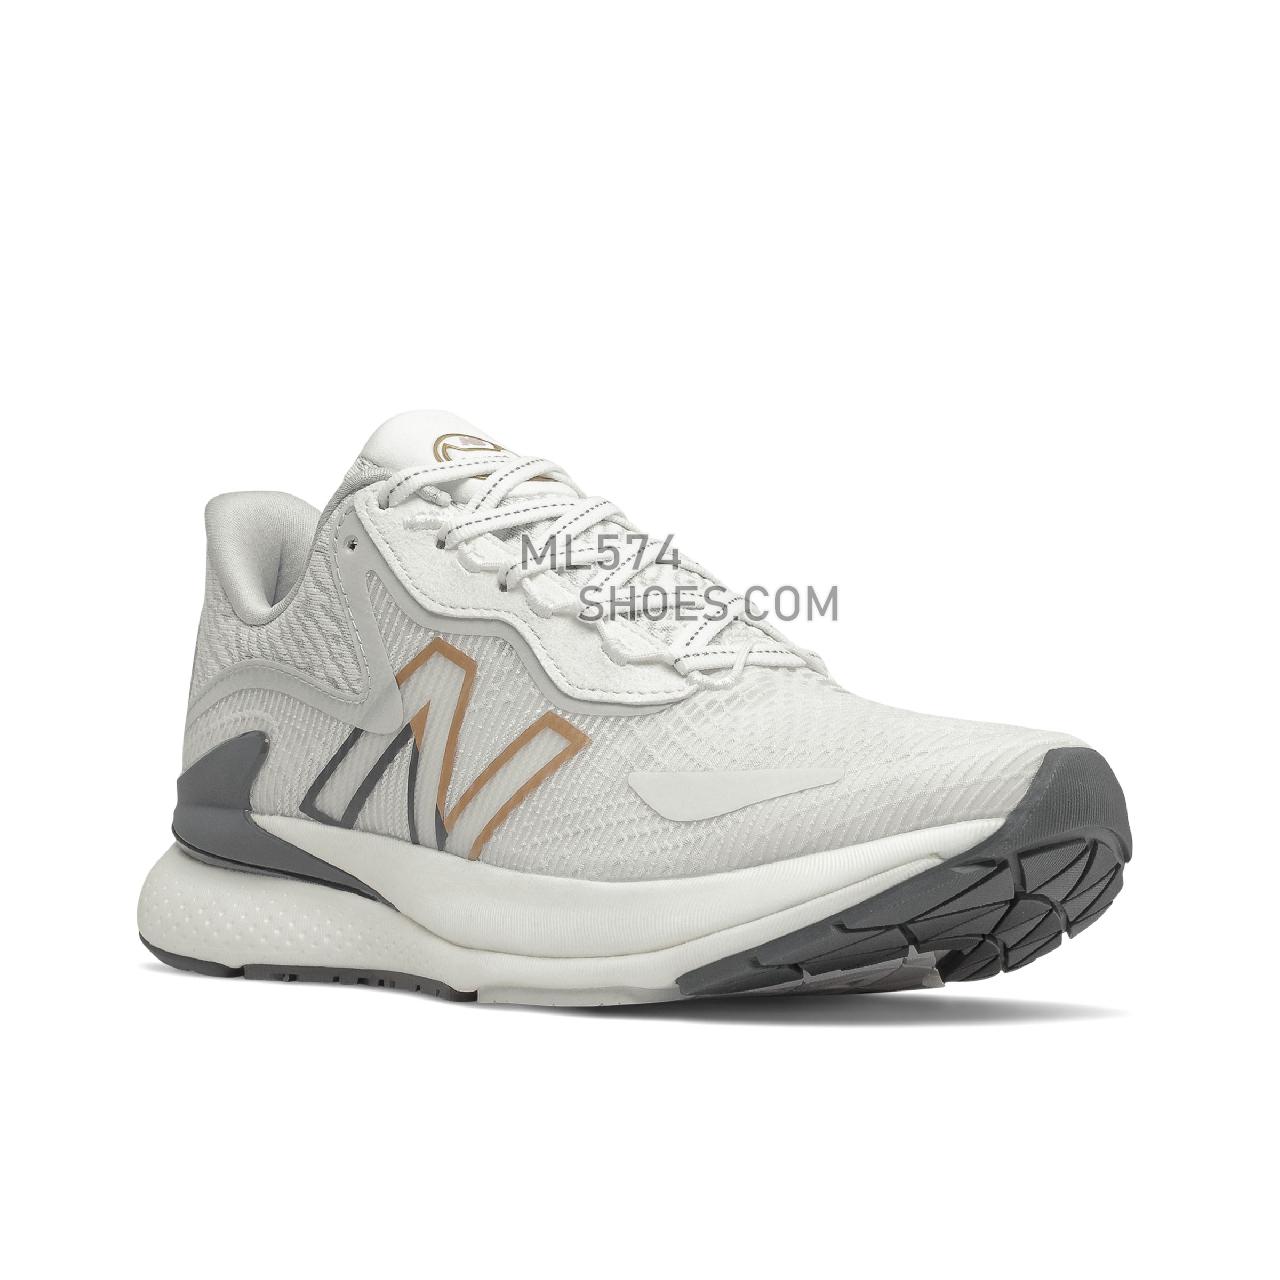 New Balance Lerato - Women's Neutral Running - White with Astral Glow - WLERAWP